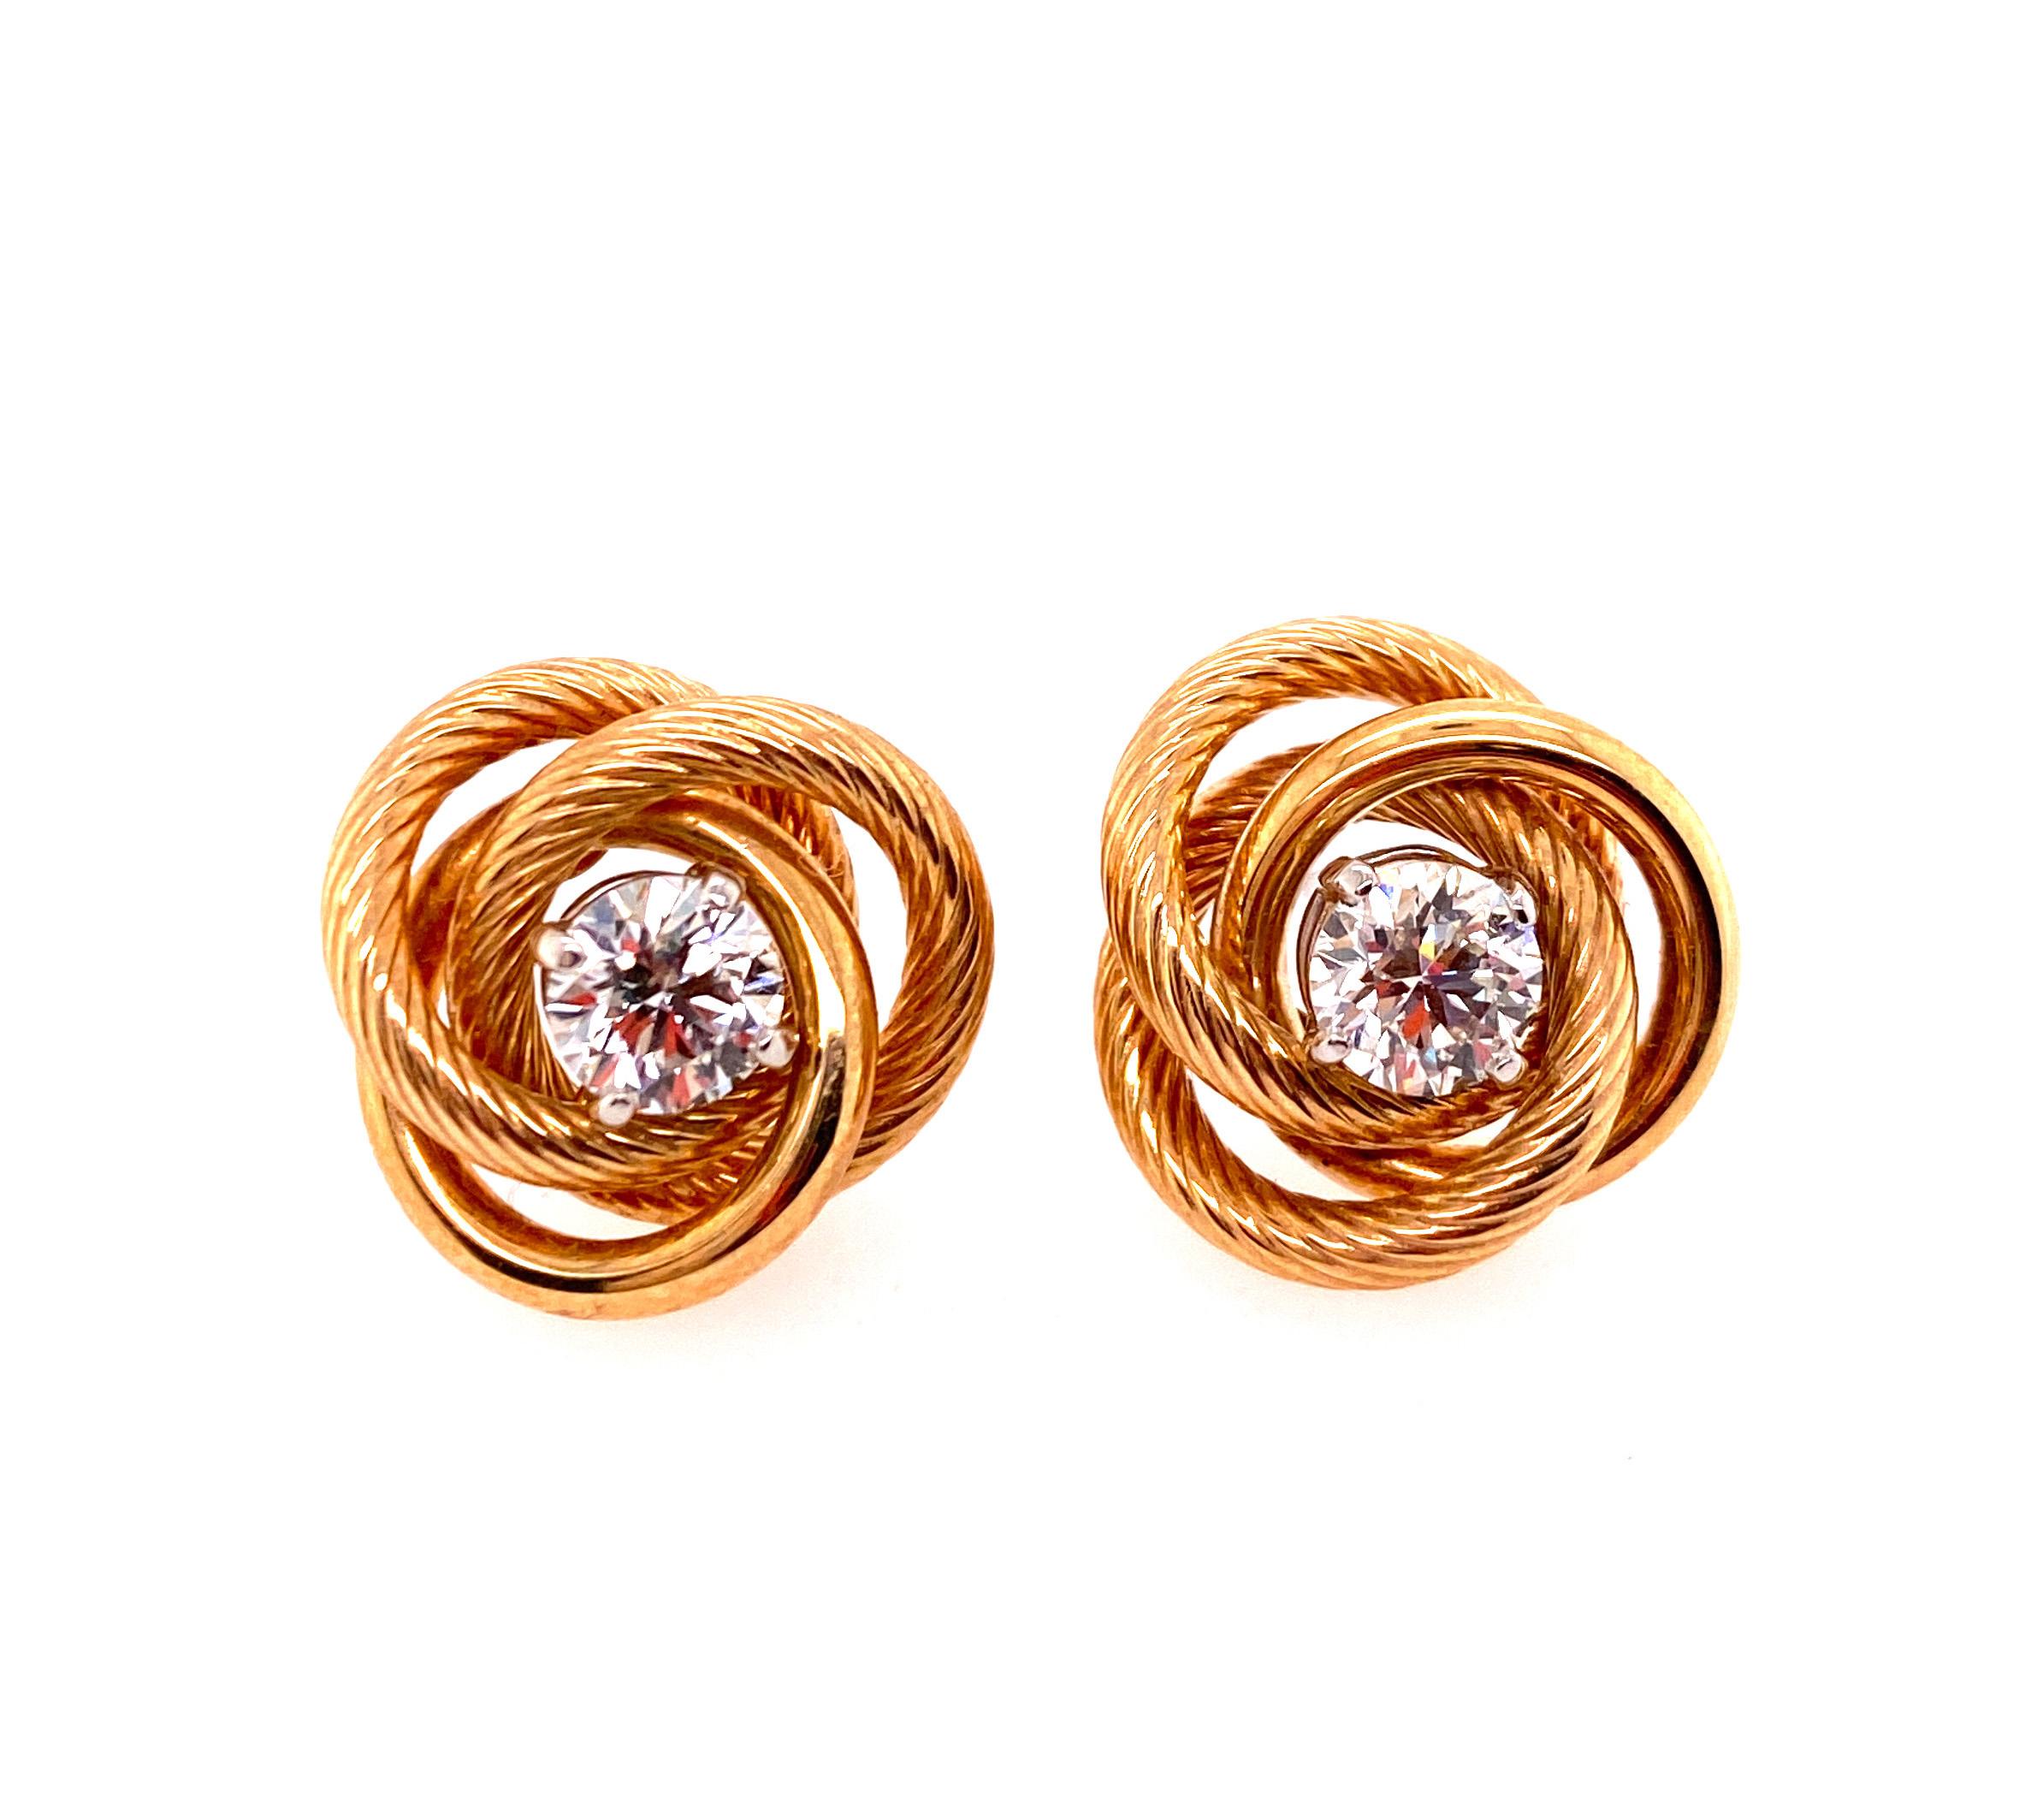 14K Yellow Gold Stud Earring Enhancers With Stud Earrings Set
 

Gold Knot Stud Enhancers

Comes With 3 Sets of Stud Earrings, Including Pearl Studs

Weigh 3.9 Gram

That's Over $100 in Gold Value Alone

Perfect for a Special Occasion or Just a Gift